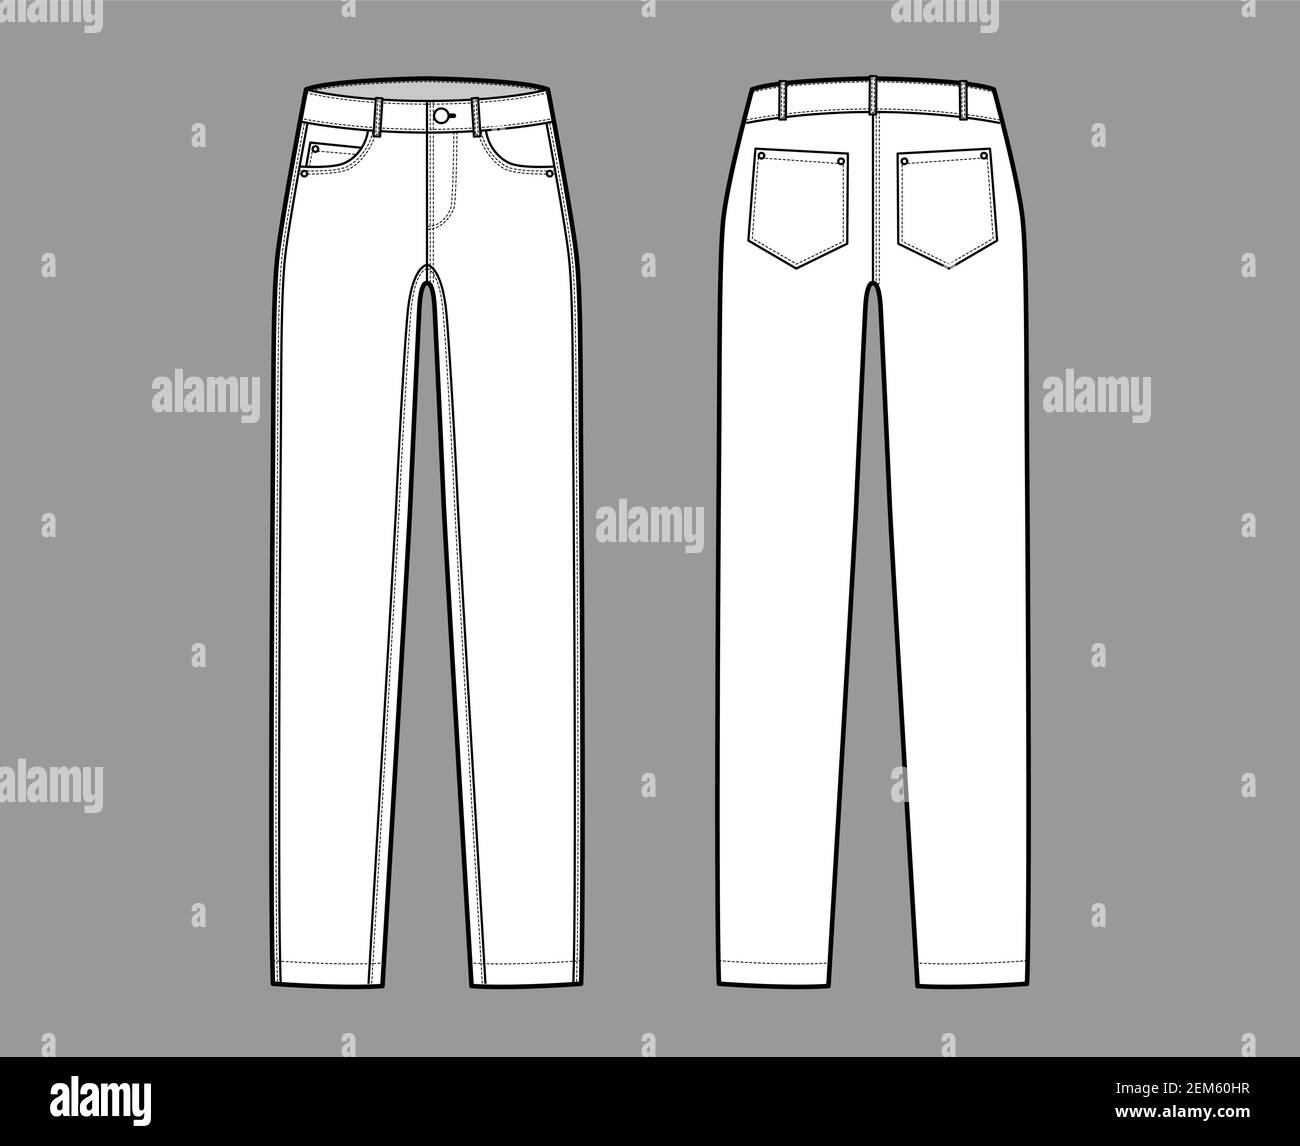 Skinny Jeans Denim pants technical fashion illustration with full ...